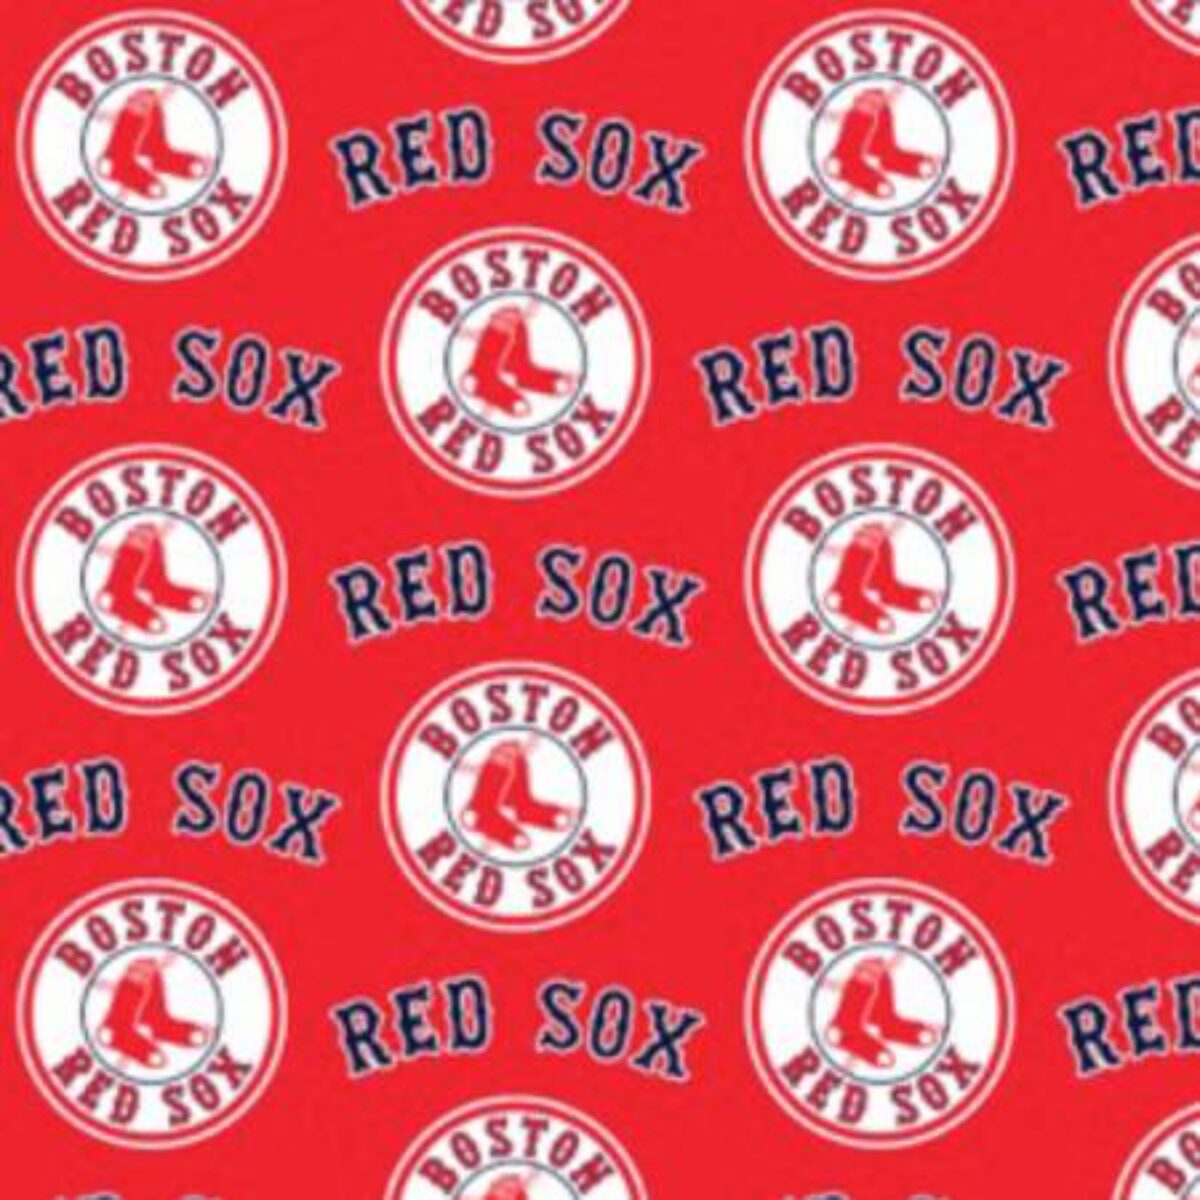 Fabric Traditions MLB Cotton Fabric St. Lous Cardinals by Fabric